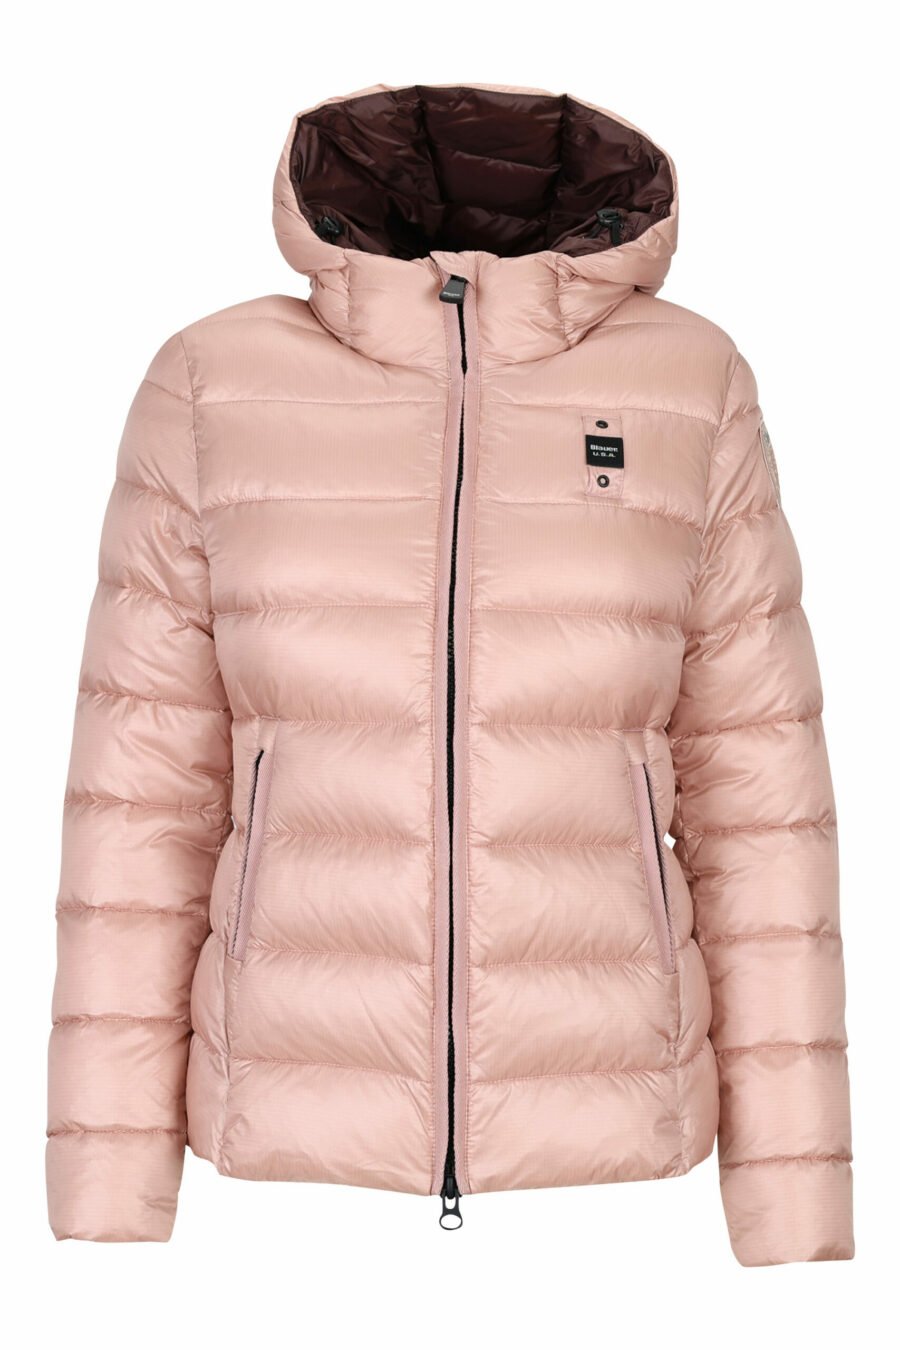 Pale pink straight lined hooded jacket with purple inside with logo patch - 8058610675660 scaled